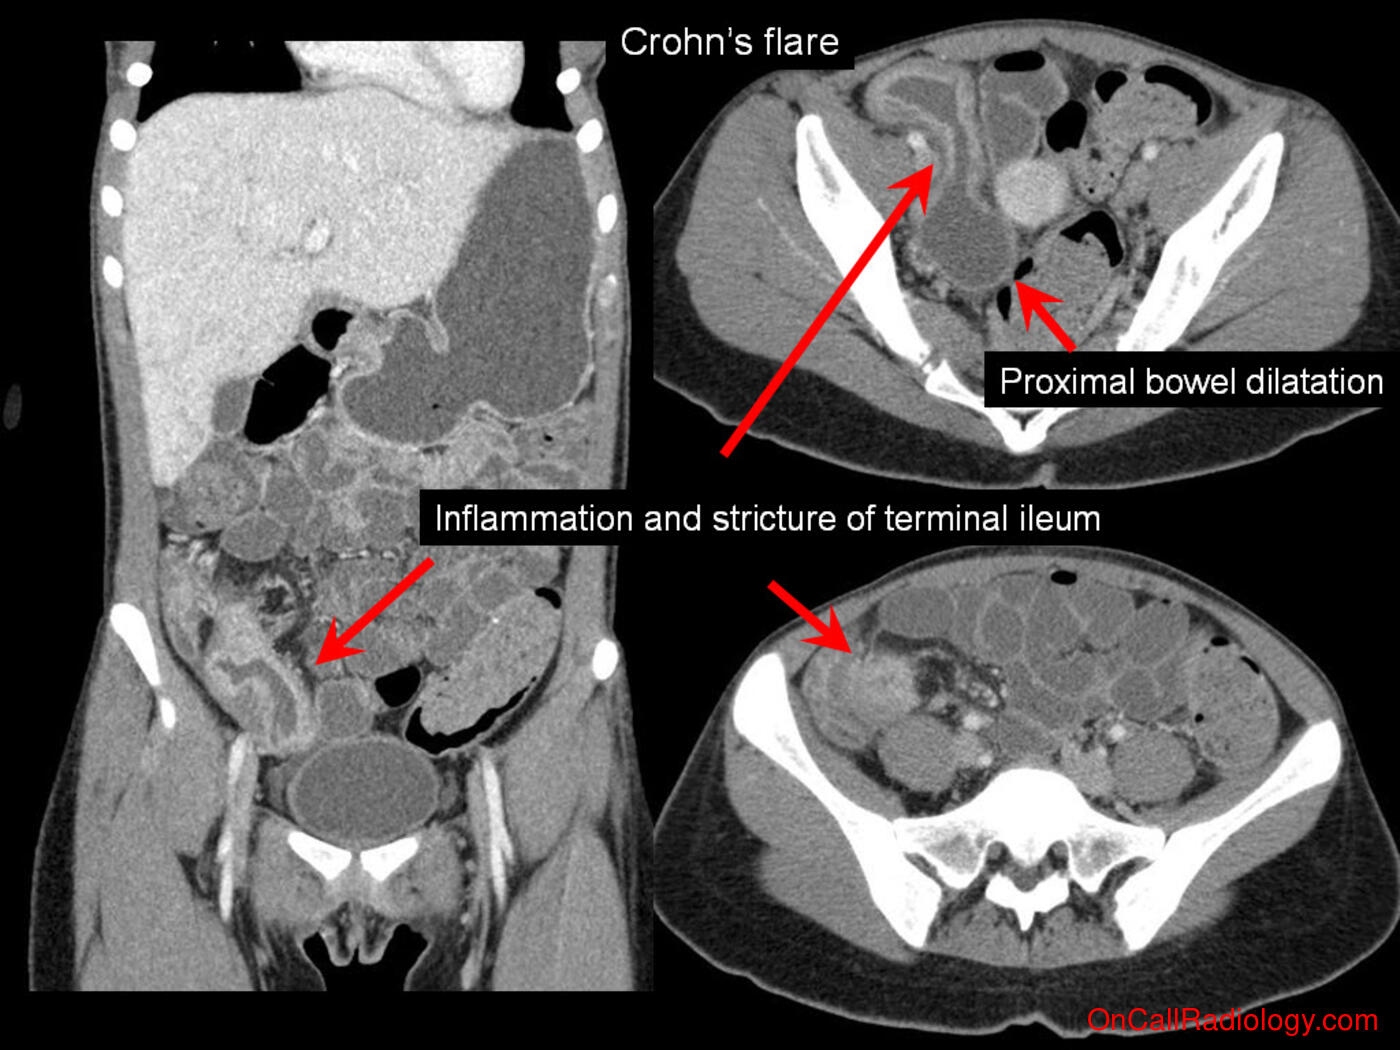 Obstruction (Crohns flare causing small bowel obstruction - Plain film, Radiograph, CT, Computed tomography)